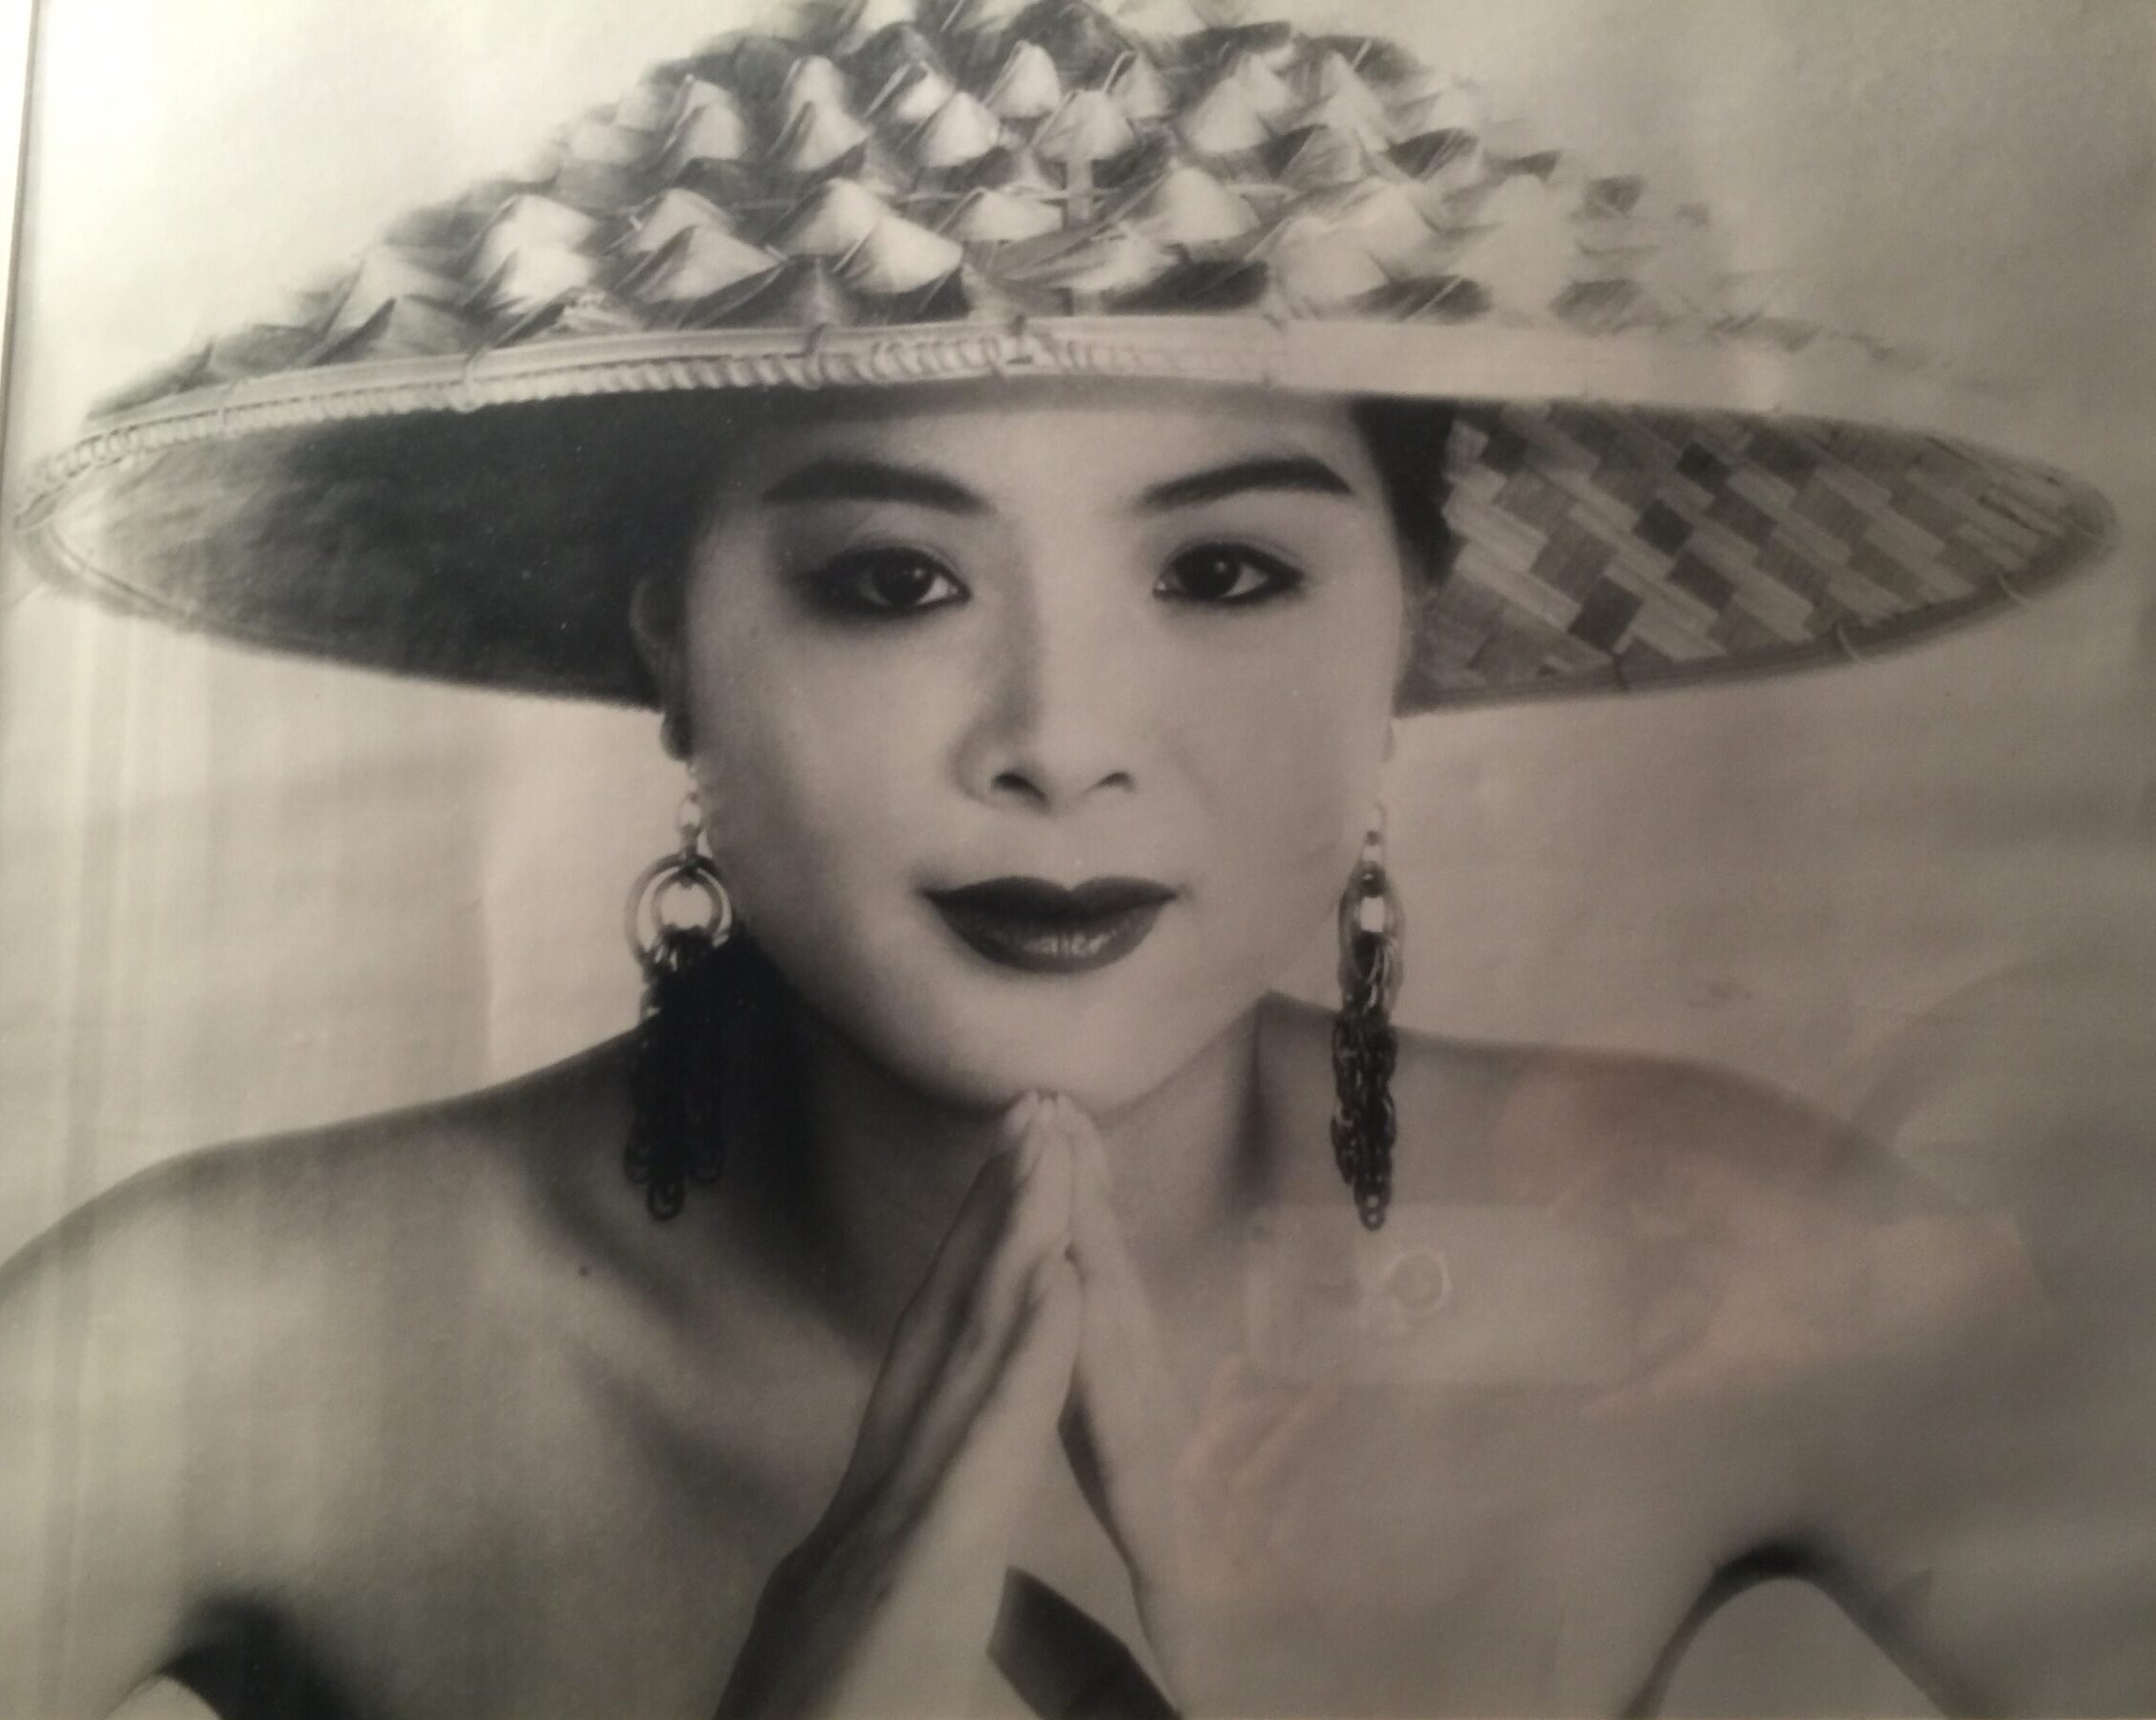 Beautiful young Chinese girl wearing only triangle straw hat with hair tucked up into it looking directly at you with long hanging tassel earrings and hands placed together in triangle prayers fashion